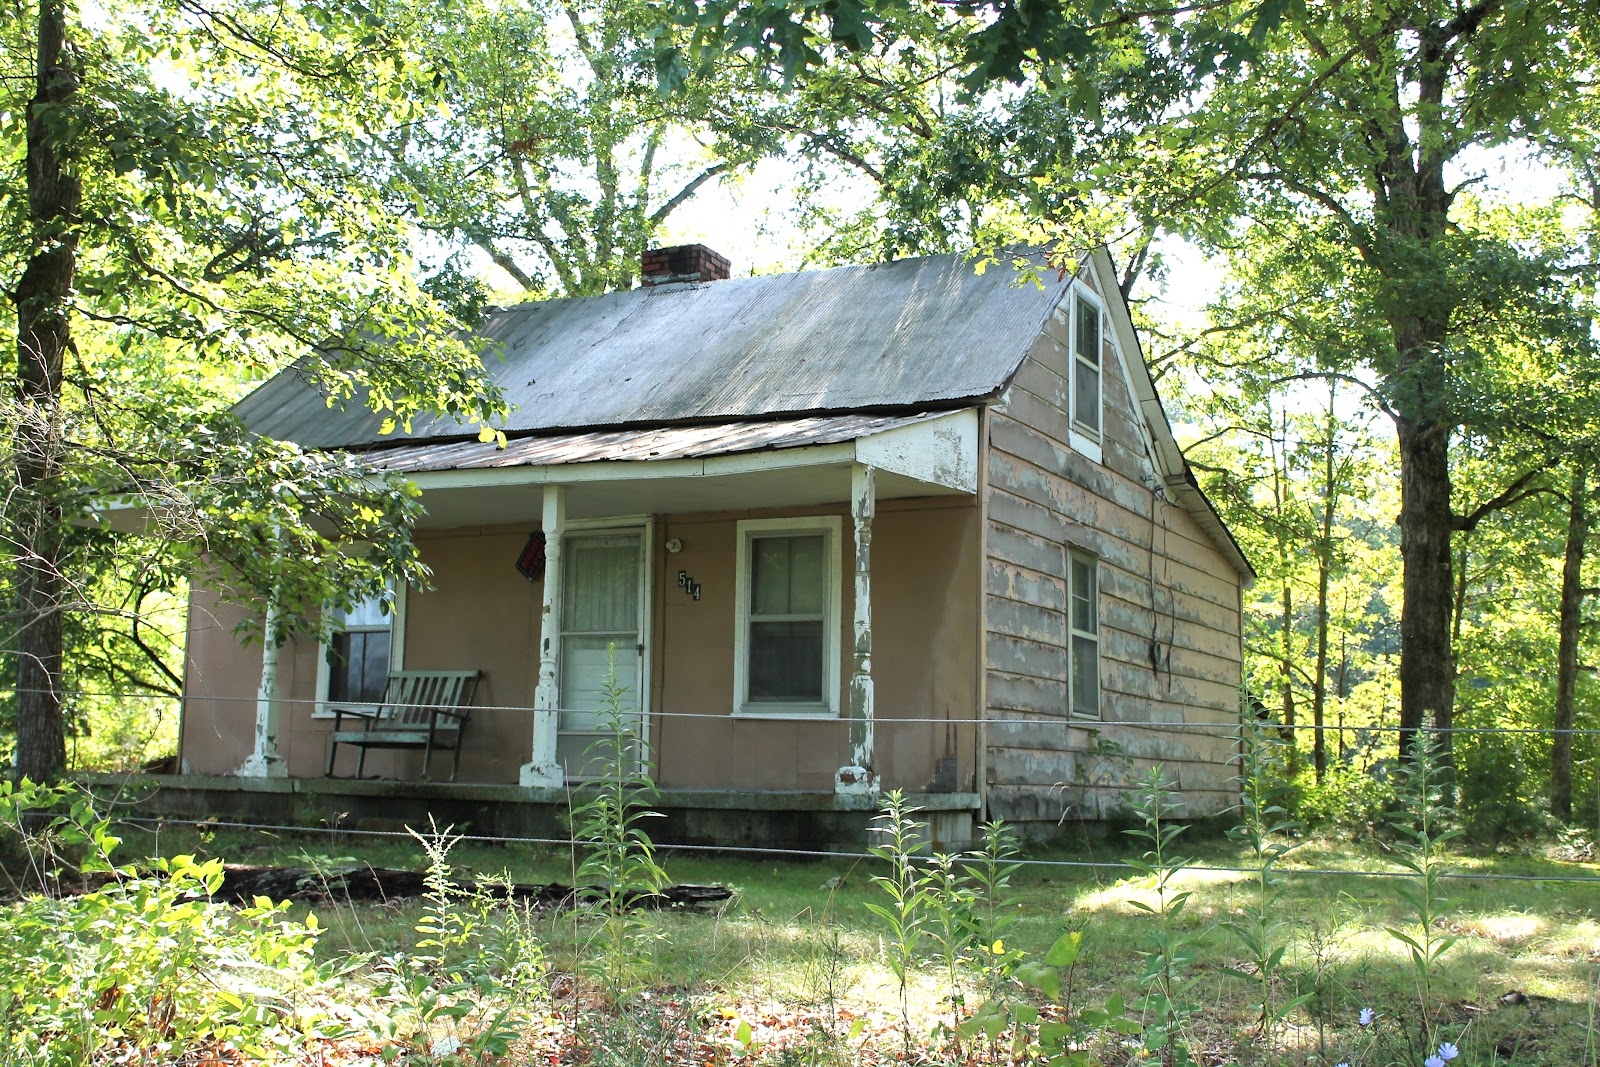 FOLKWAYS NOTEBOOK: OLD HOME ON BLUE LICK ROAD